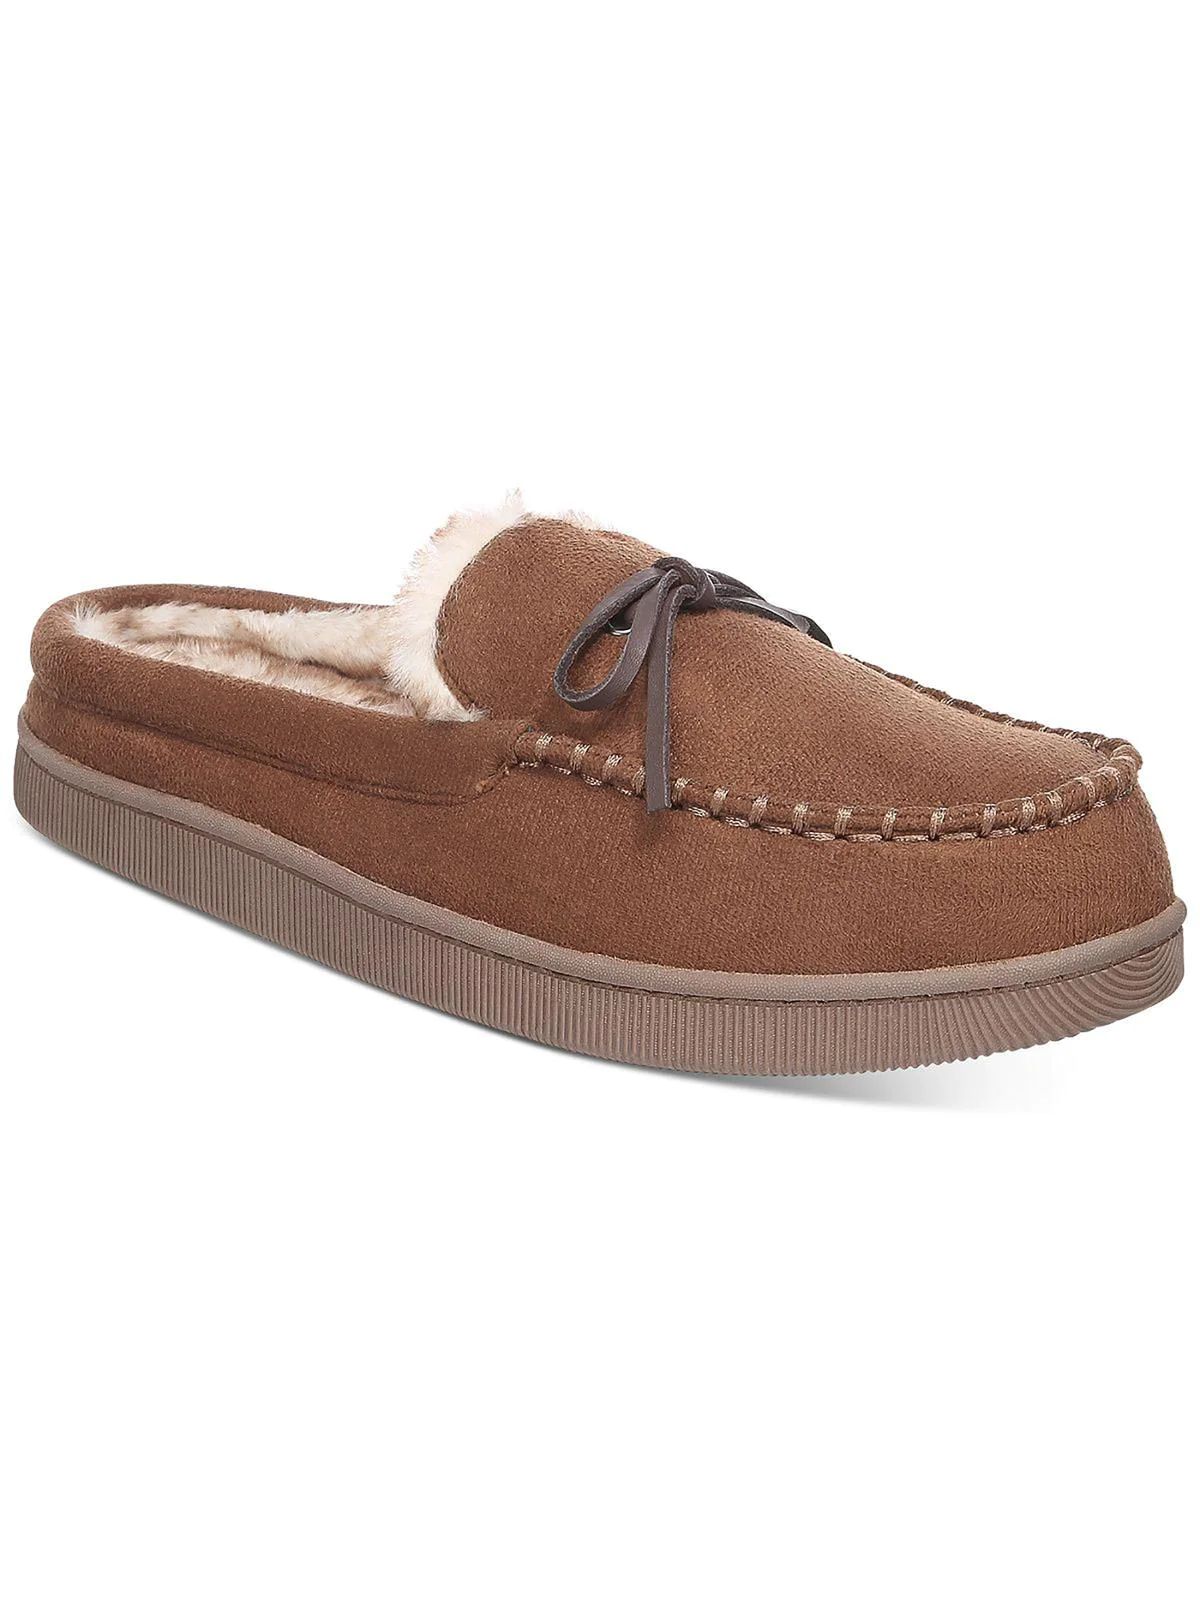 Mens Faux Suede Slip On Moccasin Slippers | Shop Premium Outlets